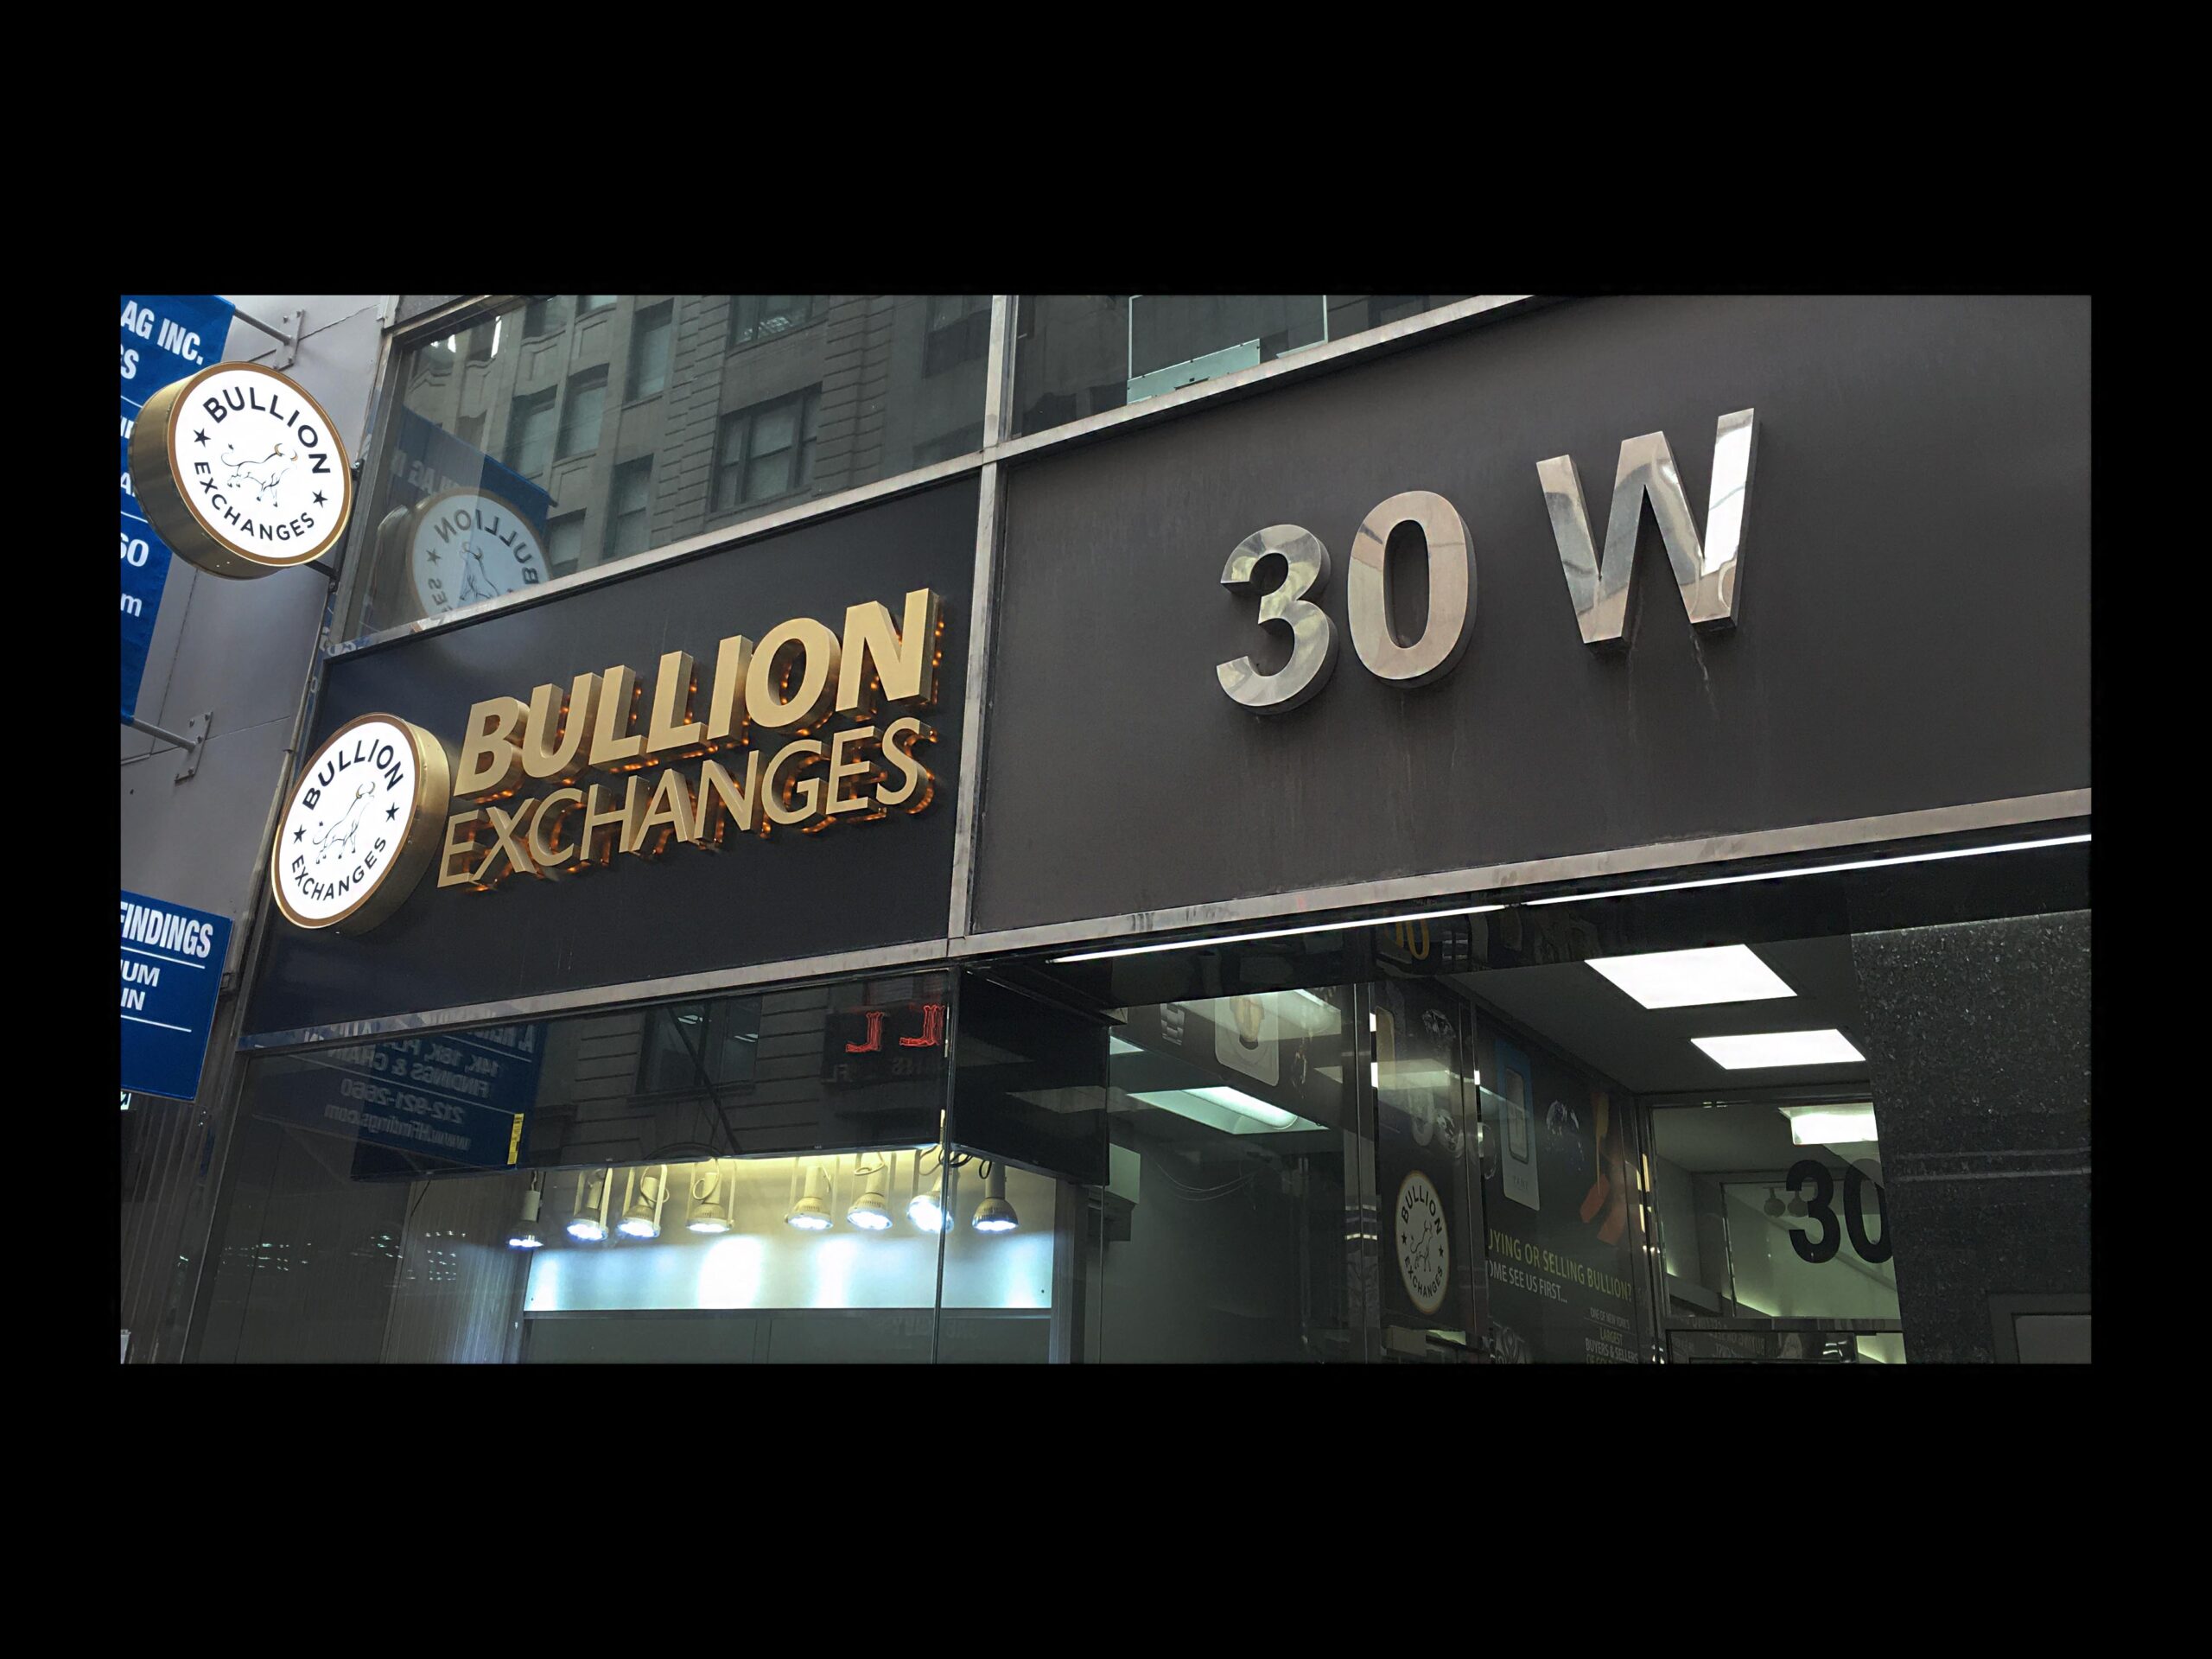 Bullion Exchanges offices